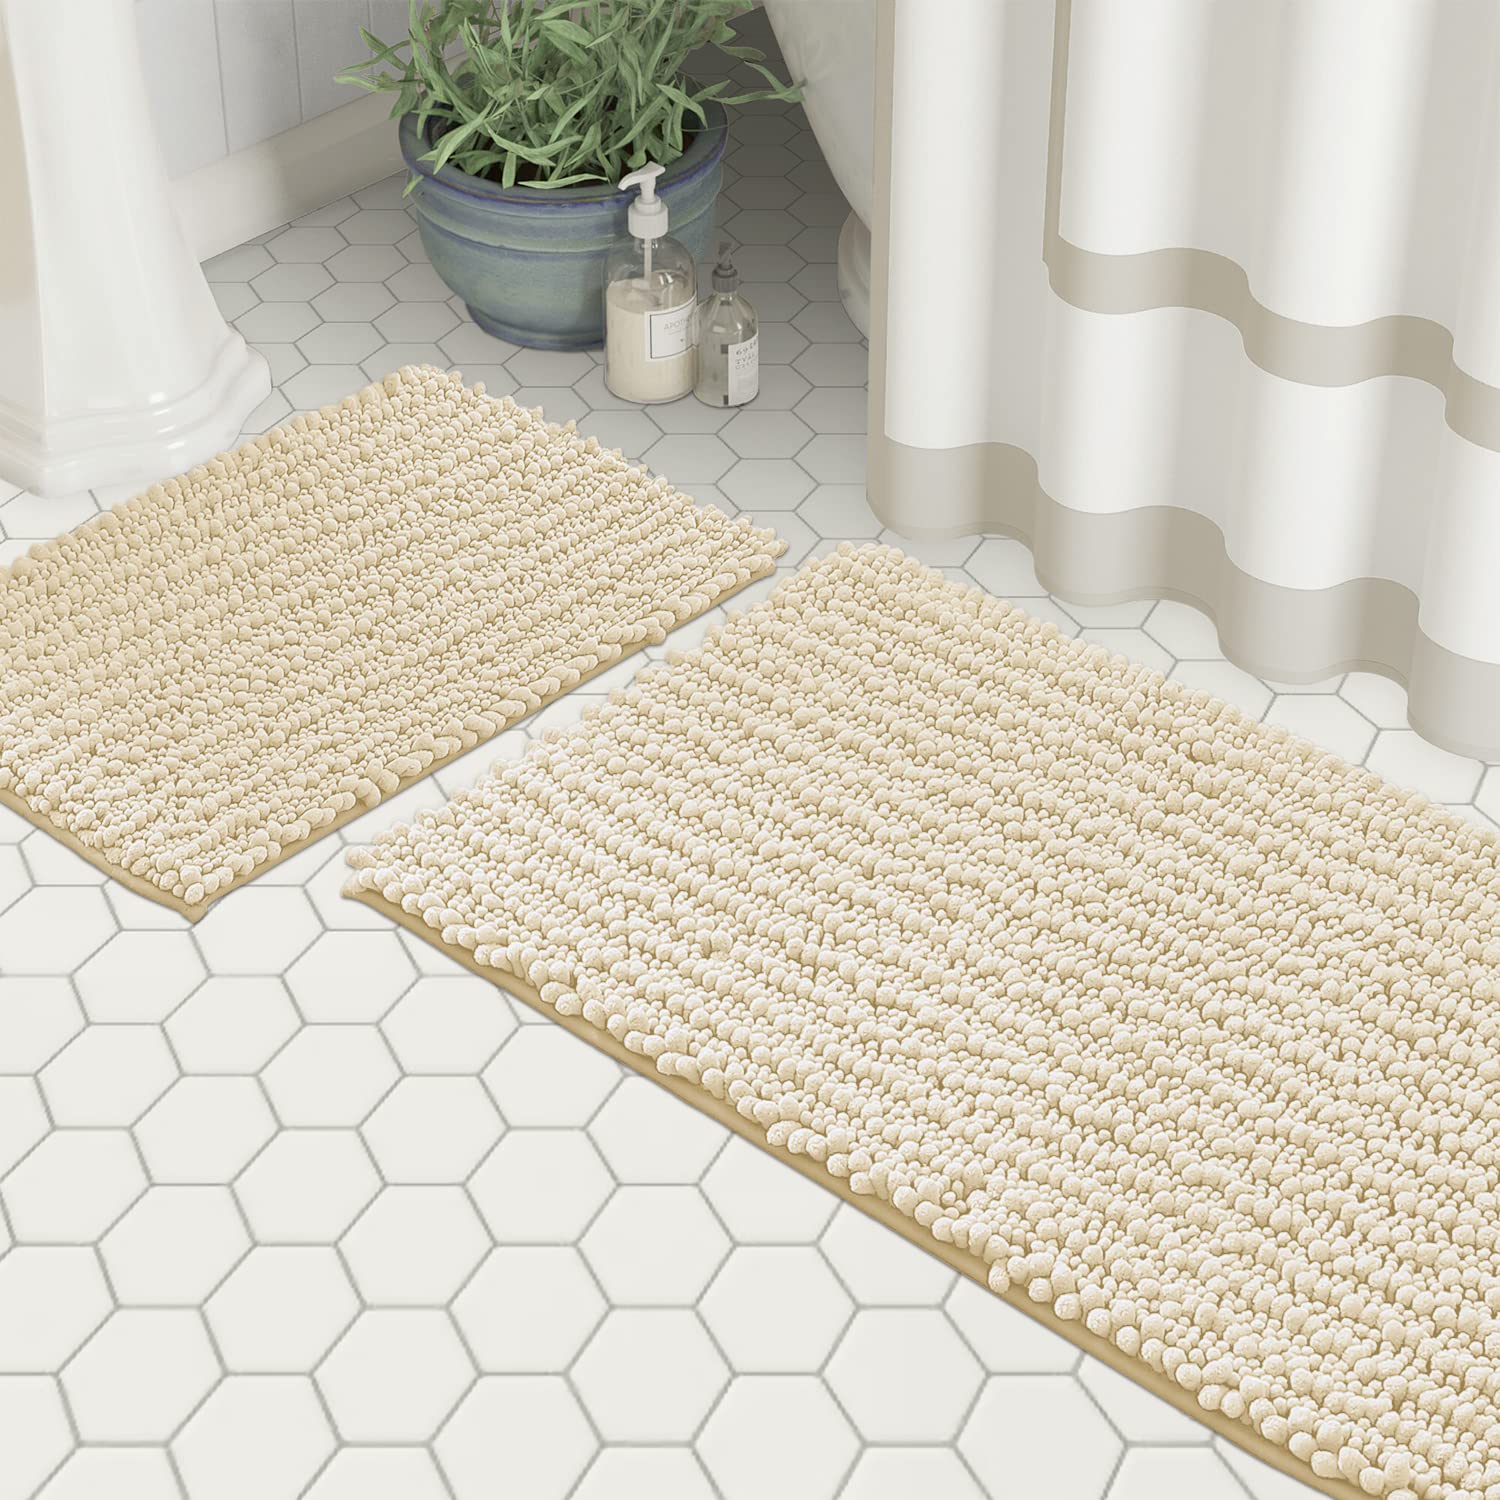 Zebrux Non Slip Thick Shaggy Bathroom Rugs, Bath Mats for Bathroom Extra Soft and Absorbent - Striped Bath Rugs Set for Indoor/Kitchen (15 x 23 +24 x 36'', Cream)  - Very Good